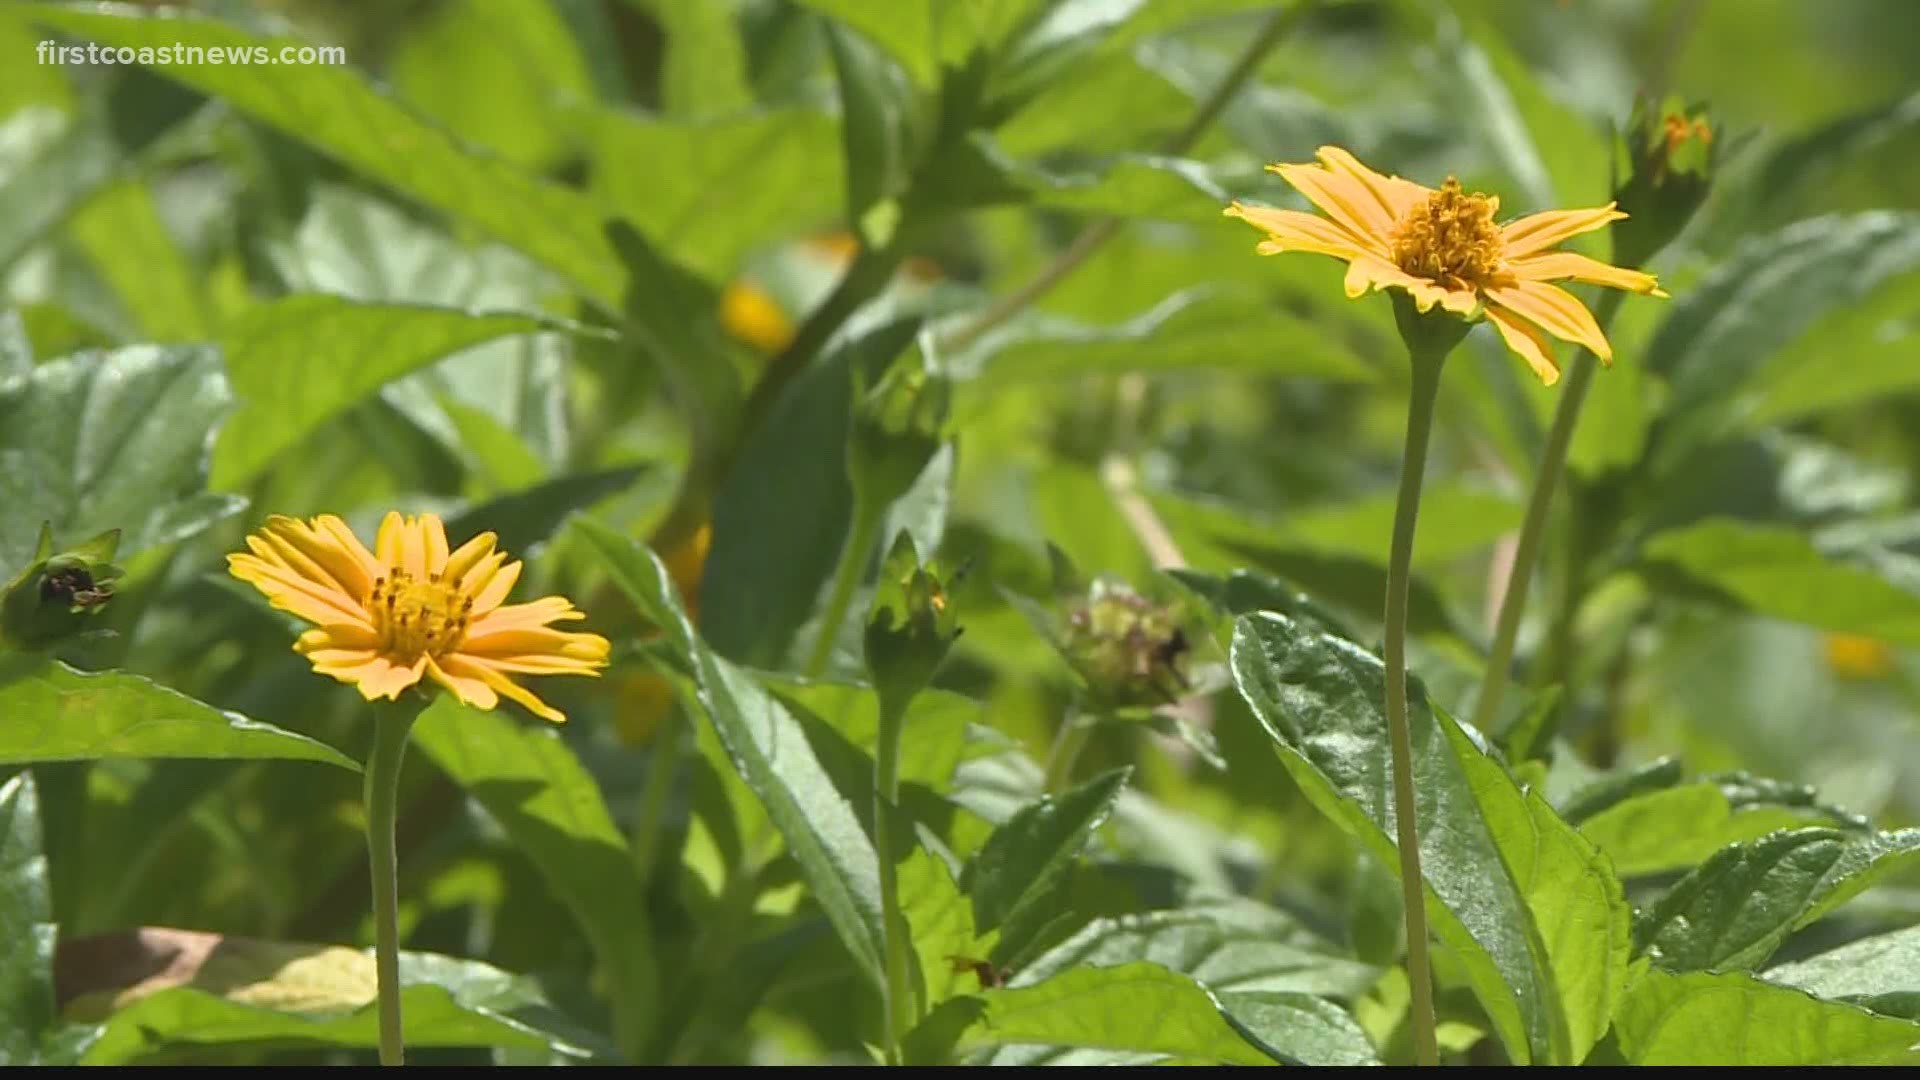 Neighbors who have lost landscaping due to past storms are turning to plants that can handle the influx of saltwater.